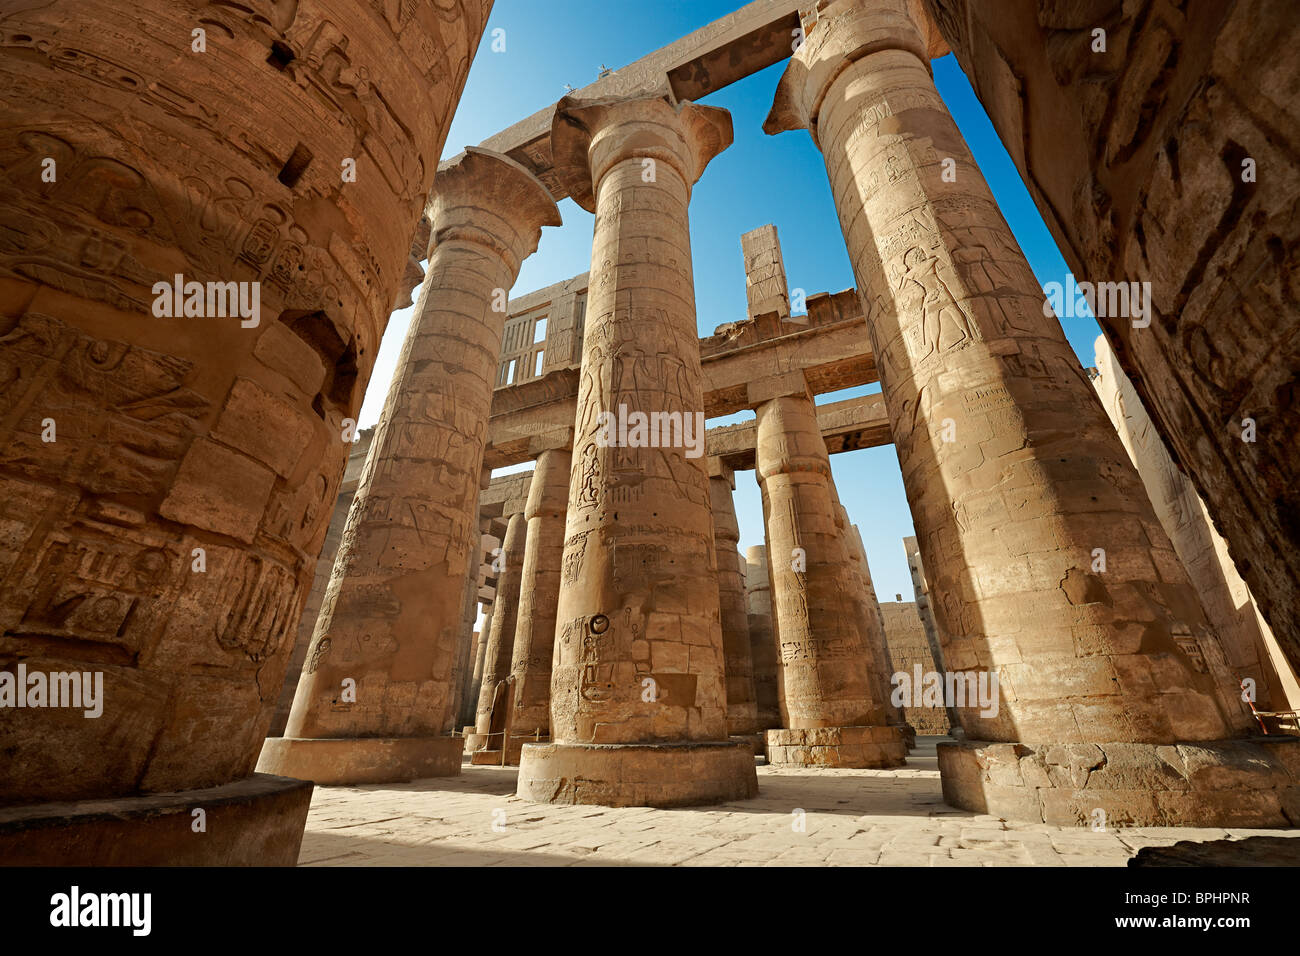 Great Hypostyle Hall of Karnak, located within the Karnak Temple Complex, Luxor, Thebes, Egypt, Arabia, Africa Stock Photo